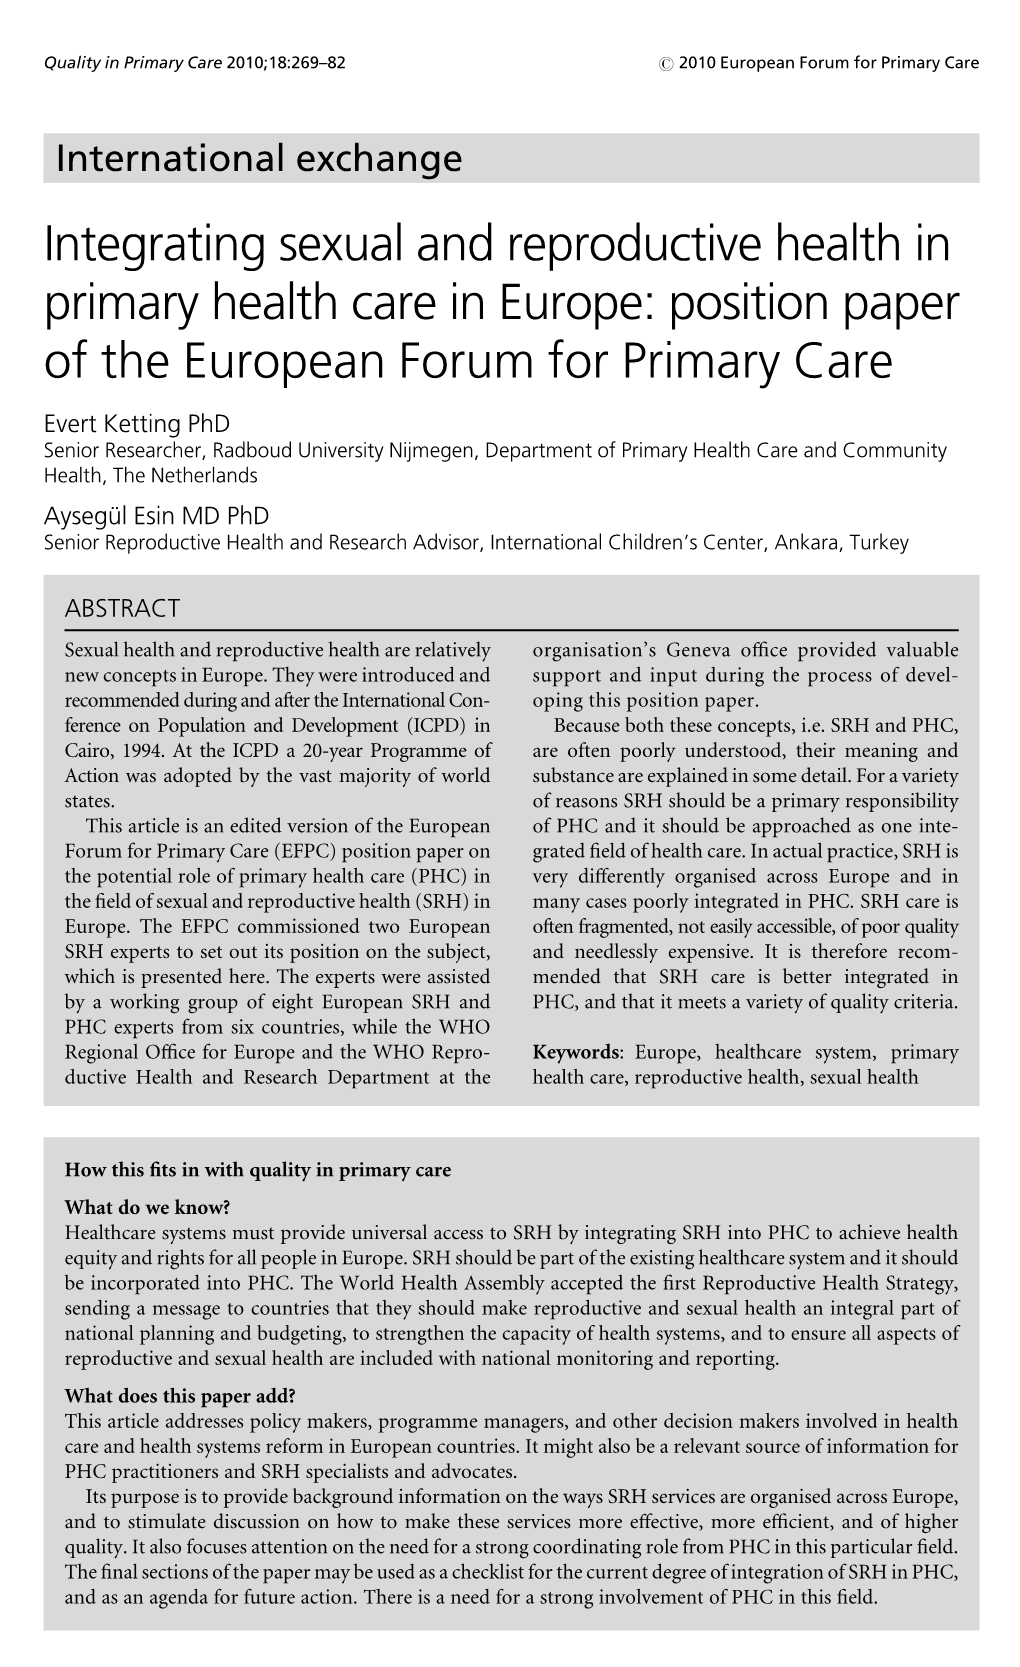 Integrating Sexual and Reproductive Health in Primary Health Care In